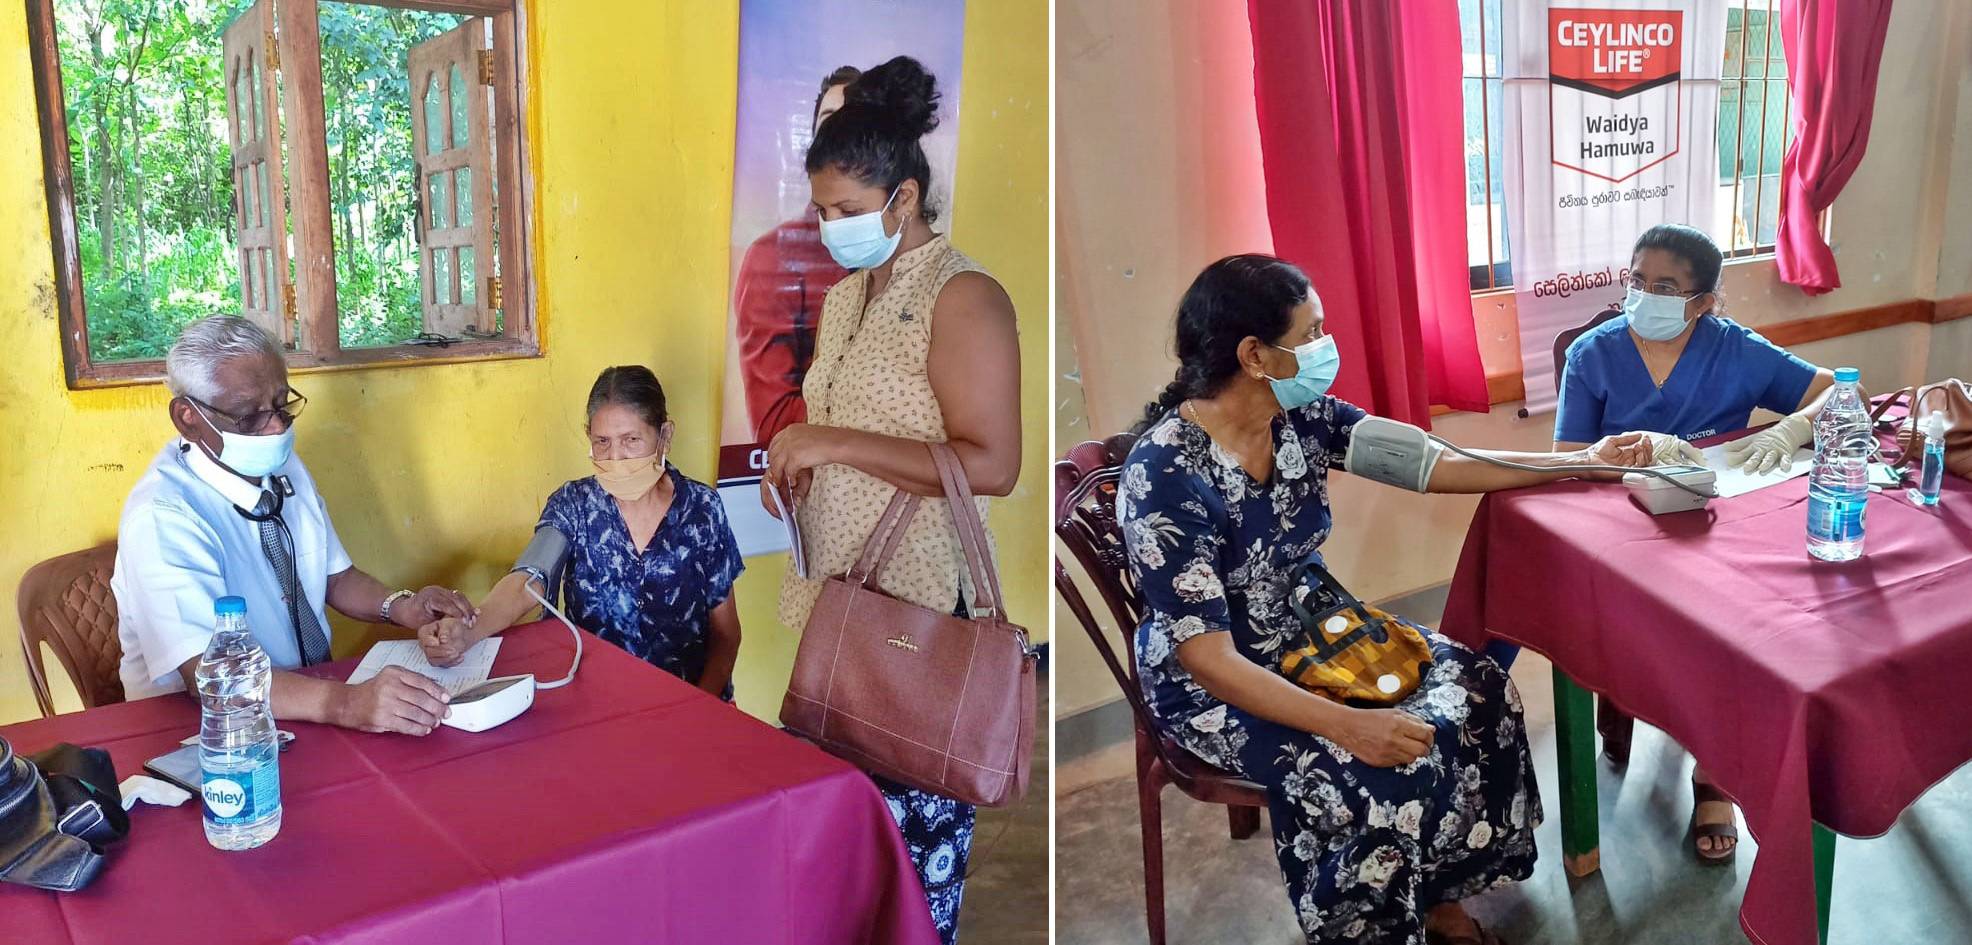 You are currently viewing Ceylinco Life conducts free medical camps in Wellawaya & Tissamaharama